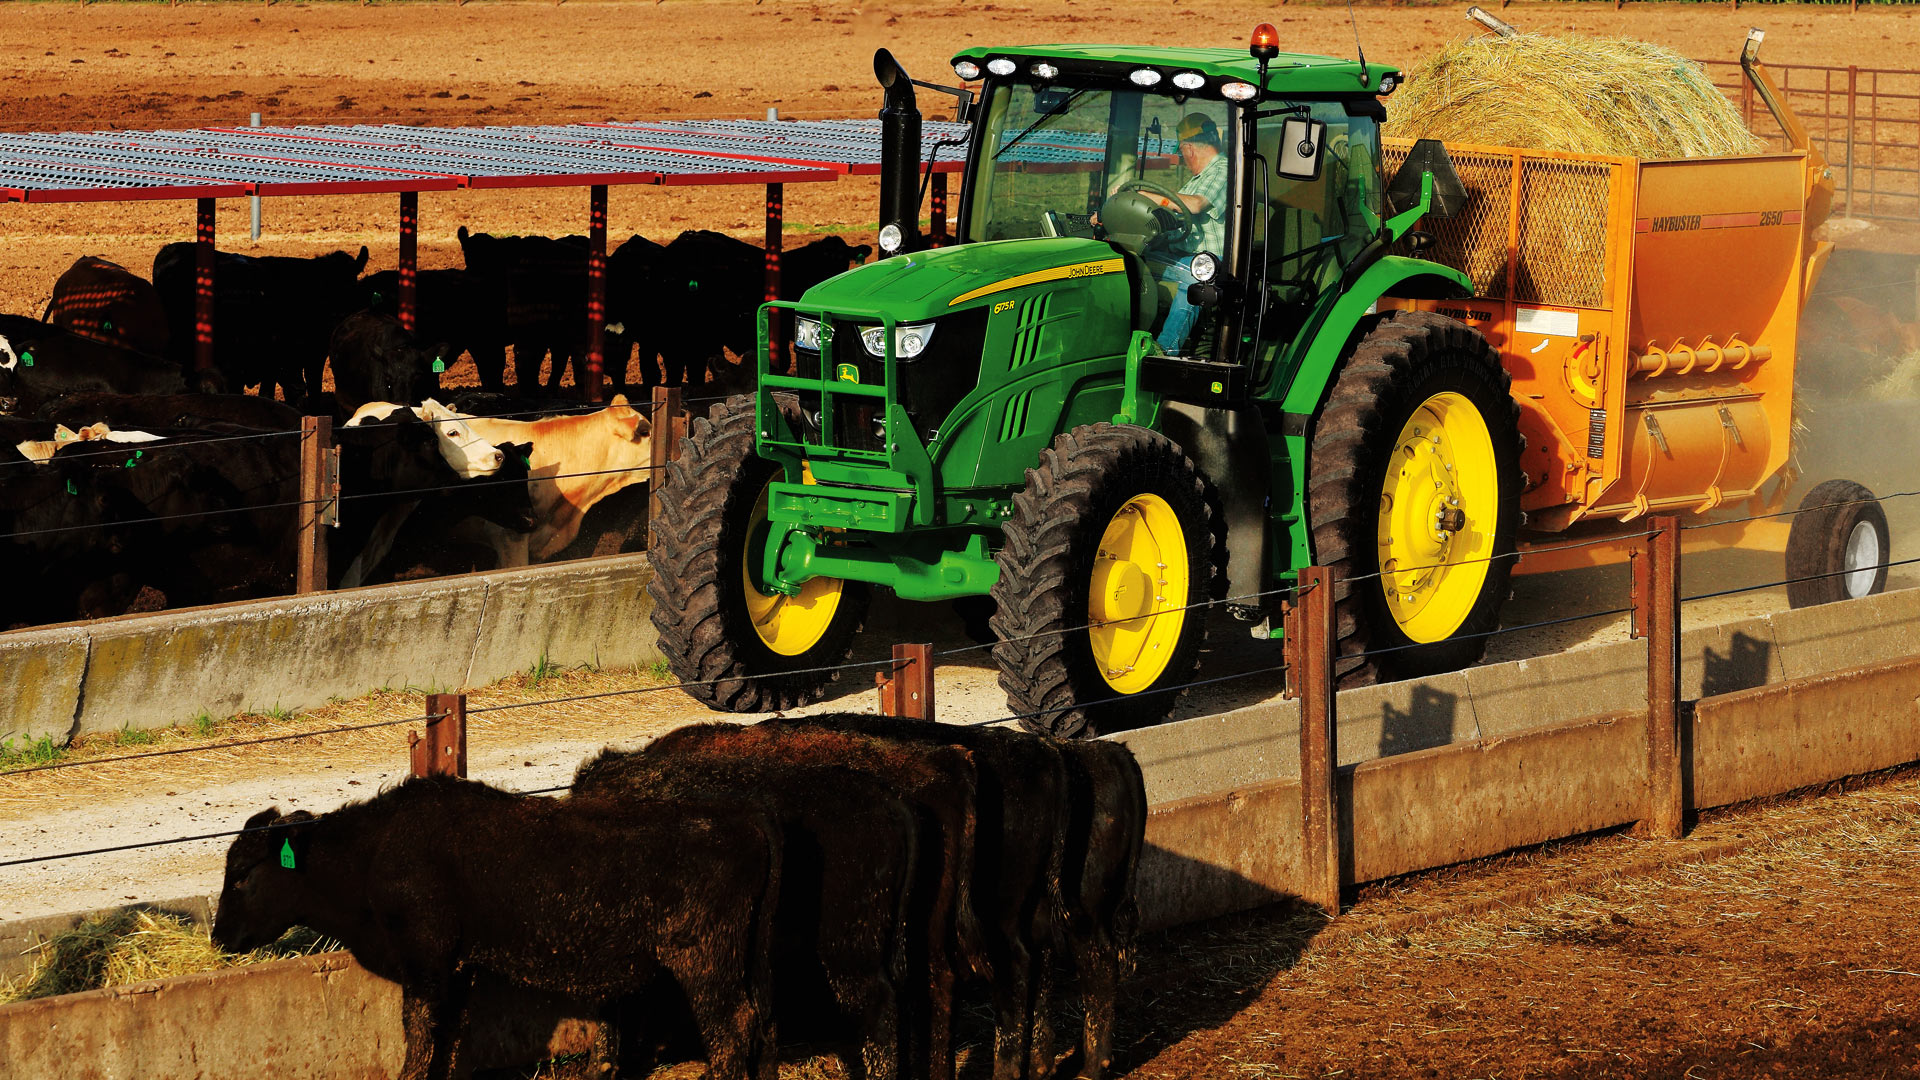 Image of tractor and cows